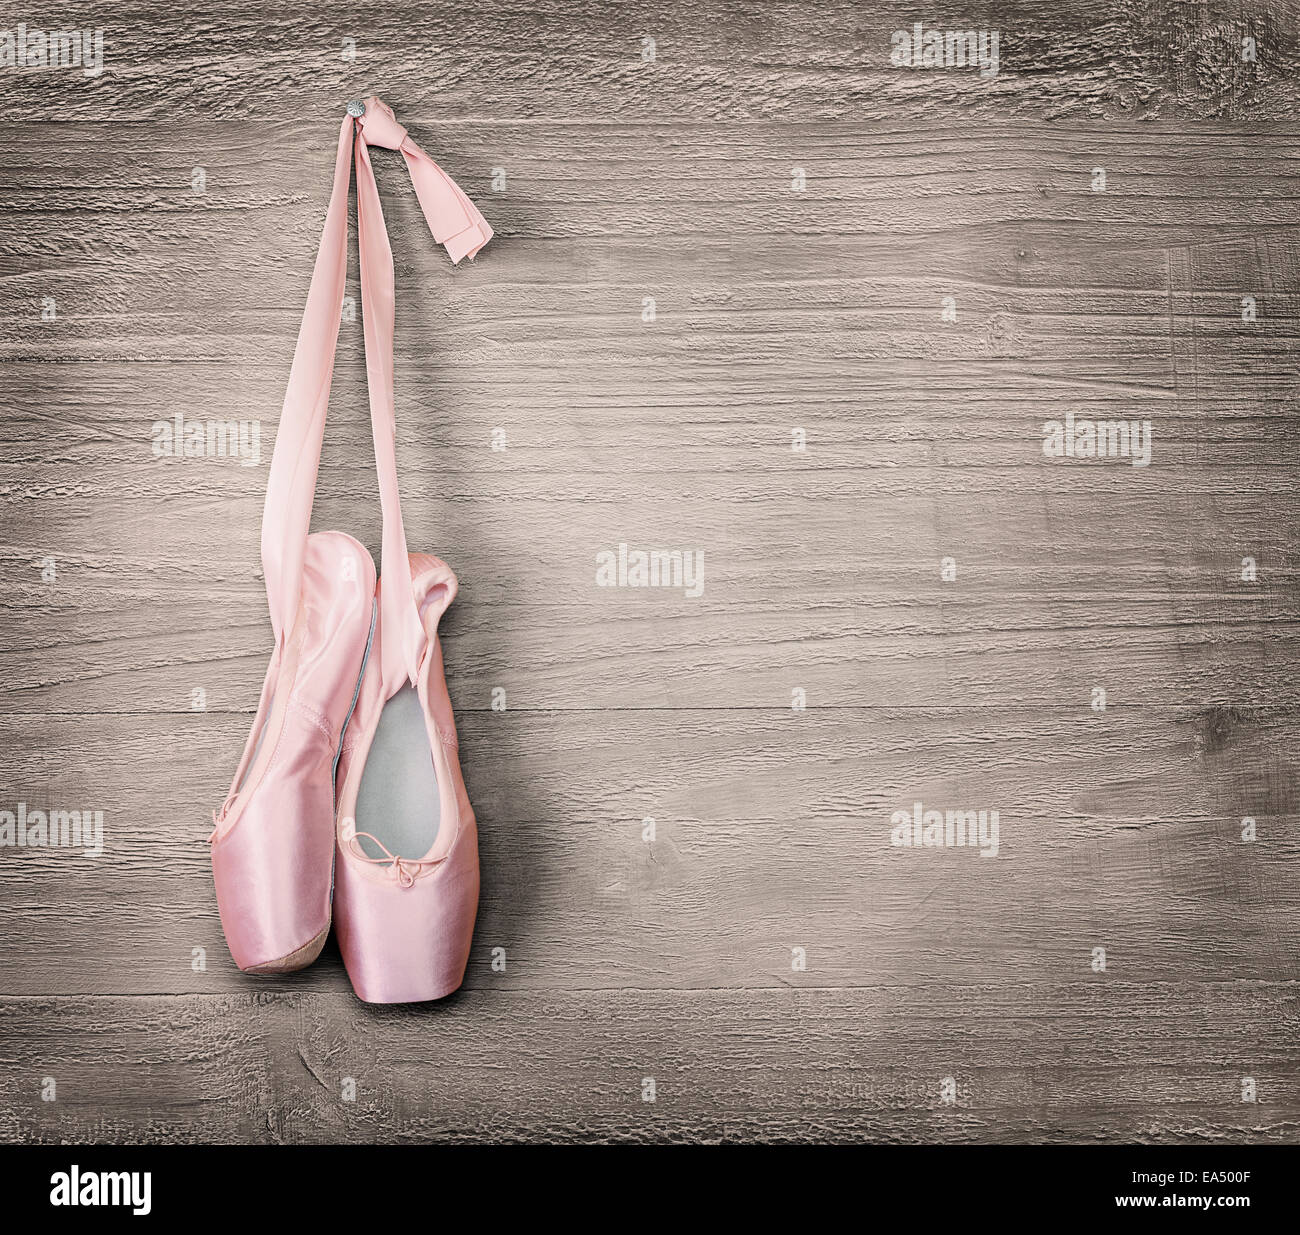 New pink ballet shoes hanging on wooden background.Vintage style. Stock Photo